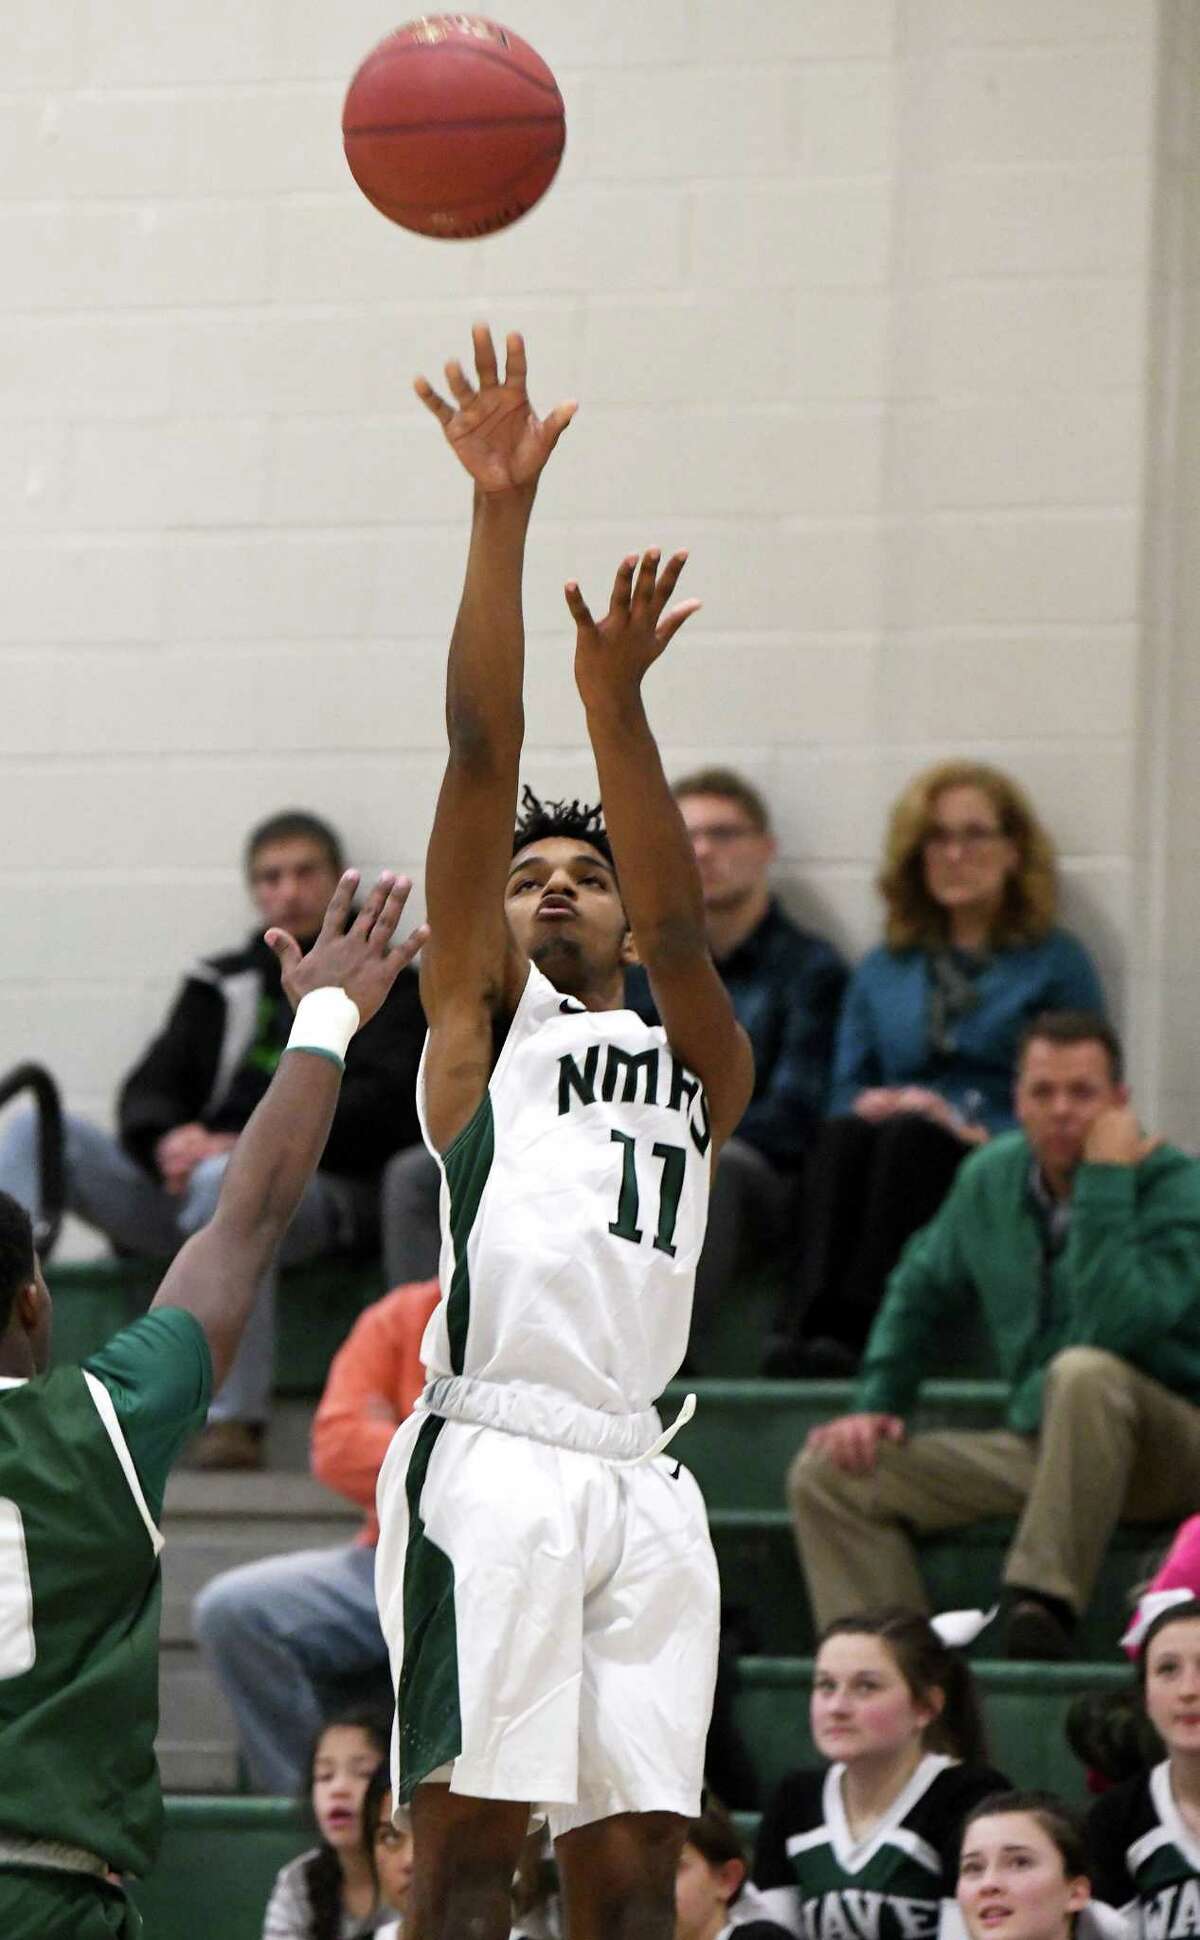 New Milford’s Matthew Brevard makes a shot during the New Milford vs Norwalk boys basketball game at New Milford, Dec. 18, 2017.